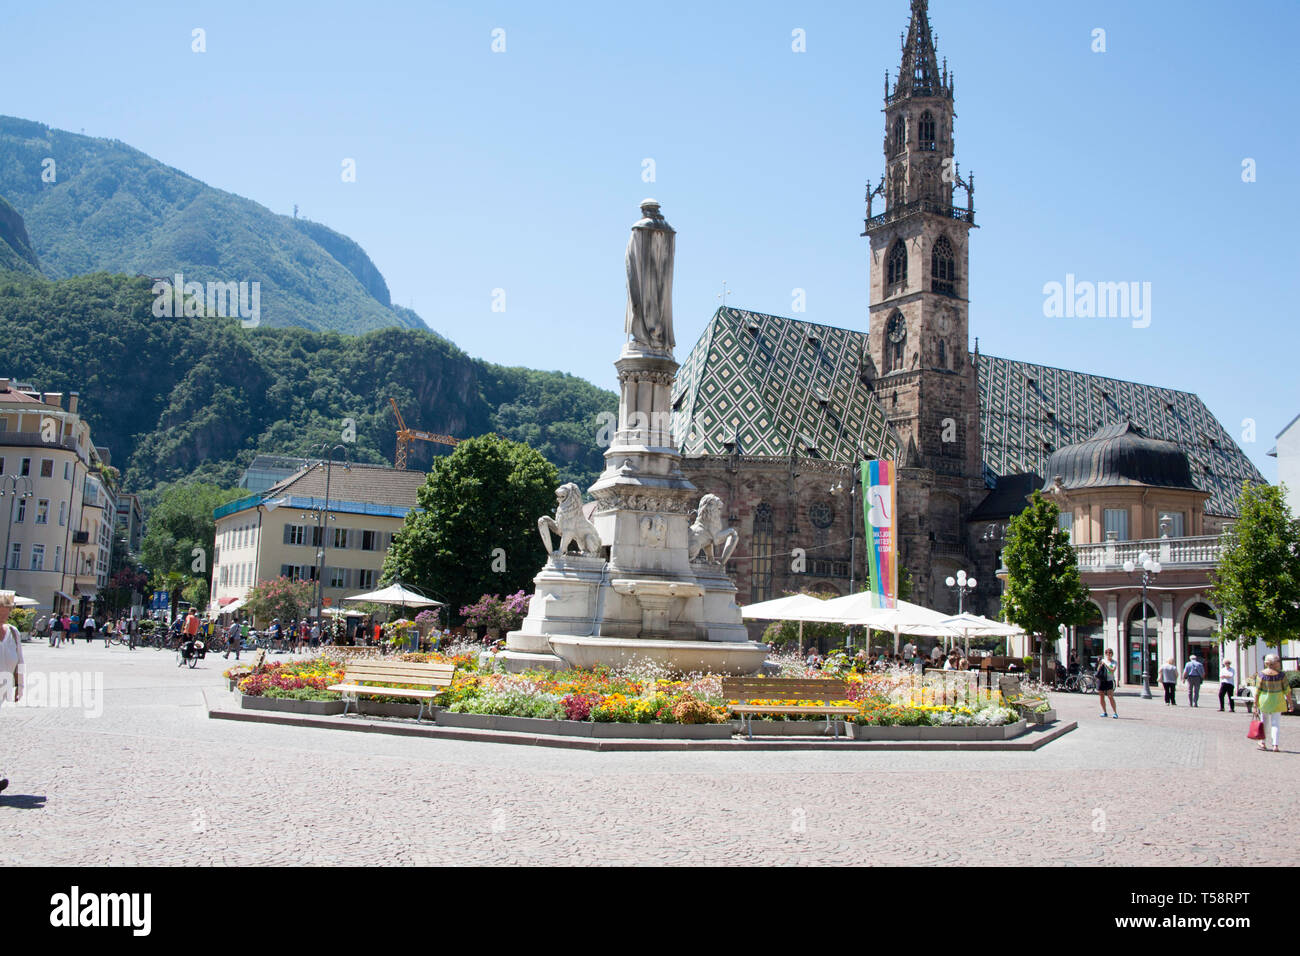 The Duomo of Dom Maria Himmelfahrt and the Piazza Walther von de Vogelweide Bolzano Dolomites South Tyrol Italy Stock Photo